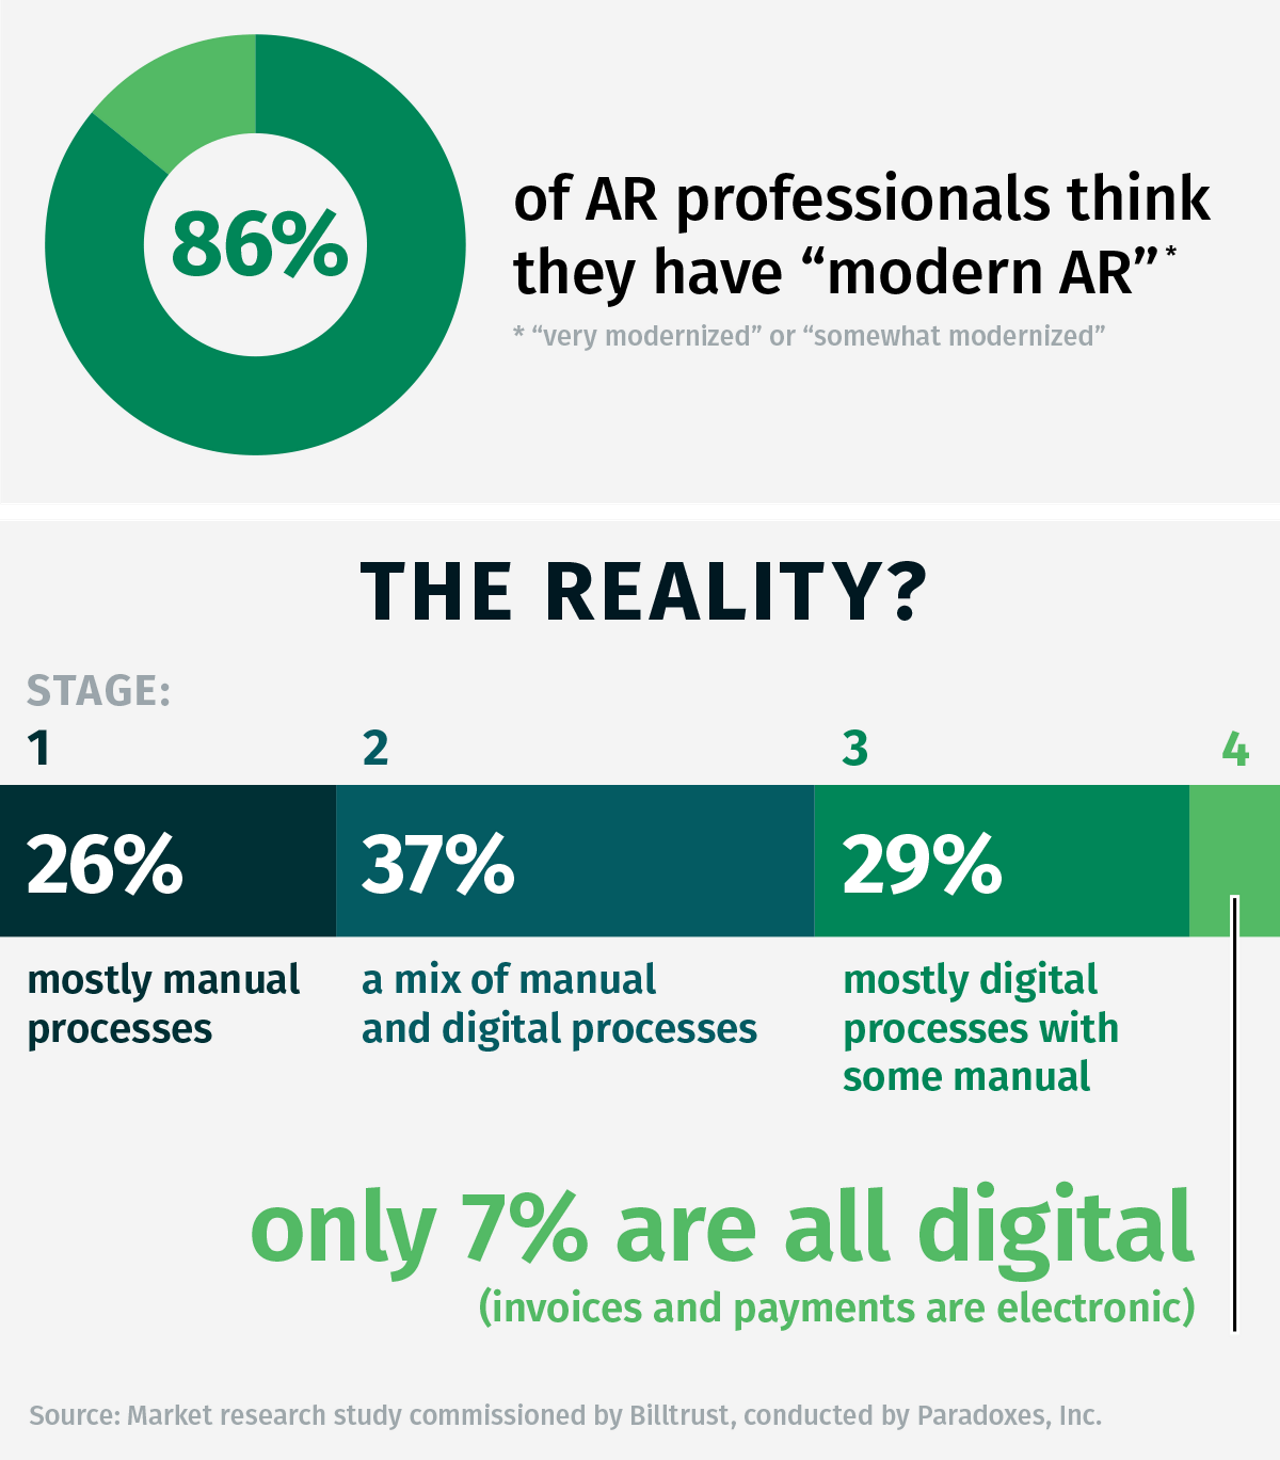 Billtrust White Paper: 86 percent of AR professionals think they have modern AR. Reality only 7 percent are all digital